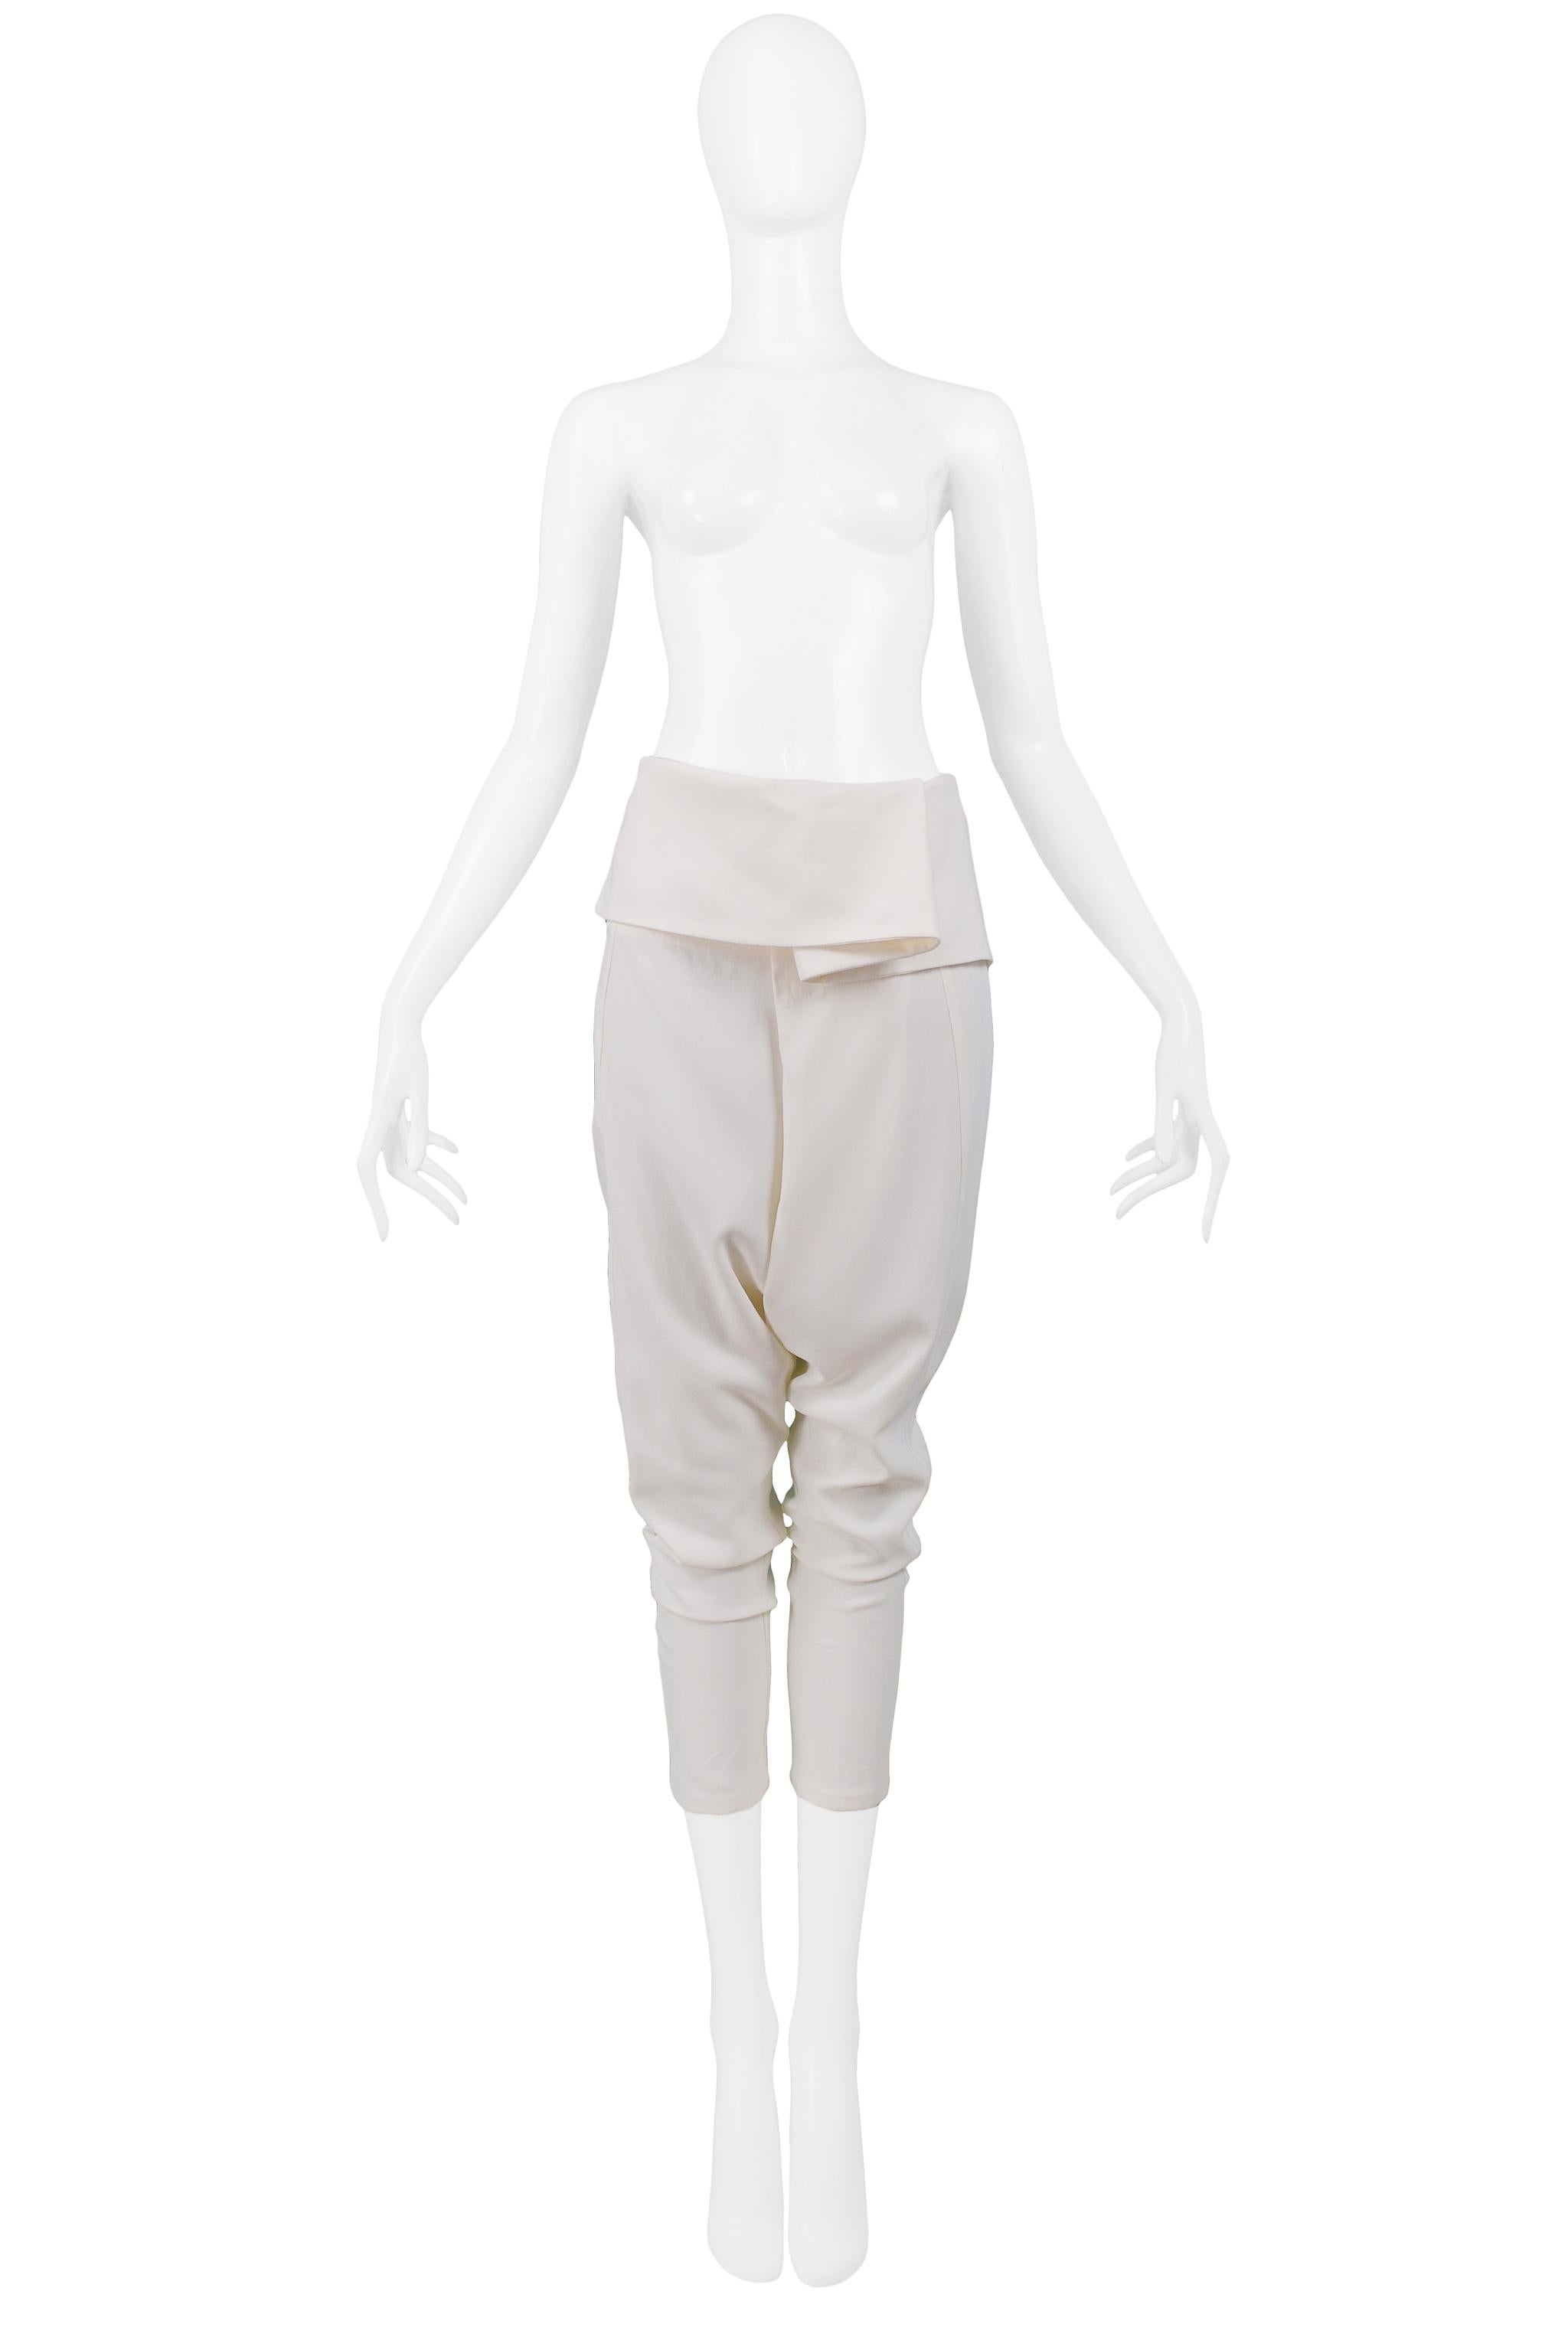 Resurrection Vintage is pleased to offer a pair of vintage Alexander McQueen off-white harem pants featuring a wide fold-over waistband, drop crotch, baggy legs, tight calves, cropped length, and center front zipper. 
Alexander McQueen Label
Size